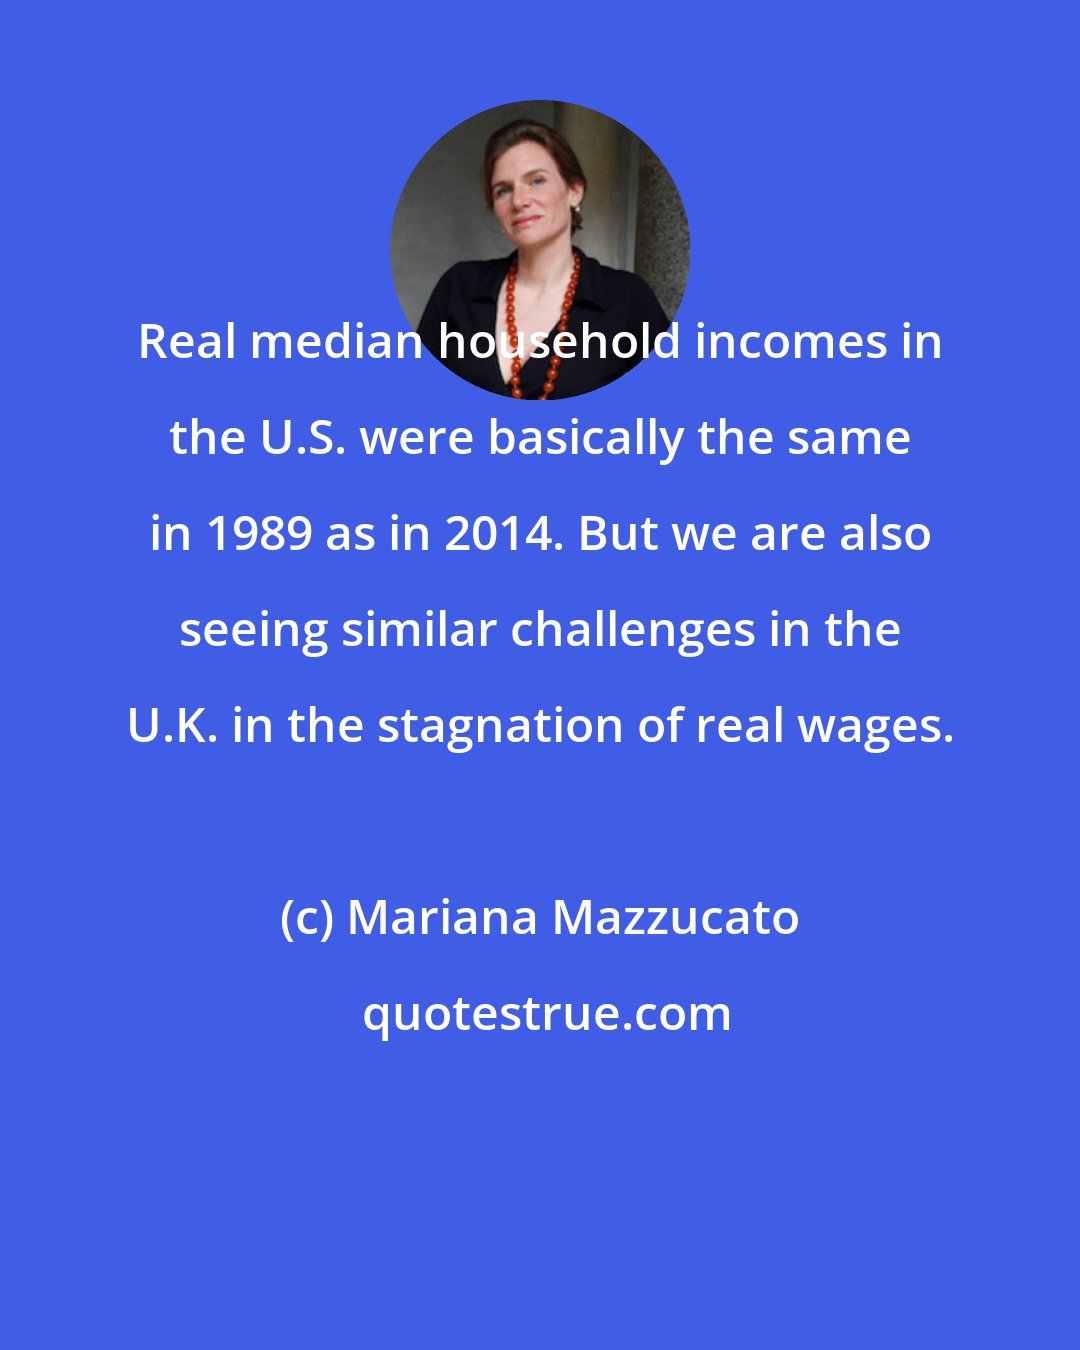 Mariana Mazzucato: Real median household incomes in the U.S. were basically the same in 1989 as in 2014. But we are also seeing similar challenges in the U.K. in the stagnation of real wages.